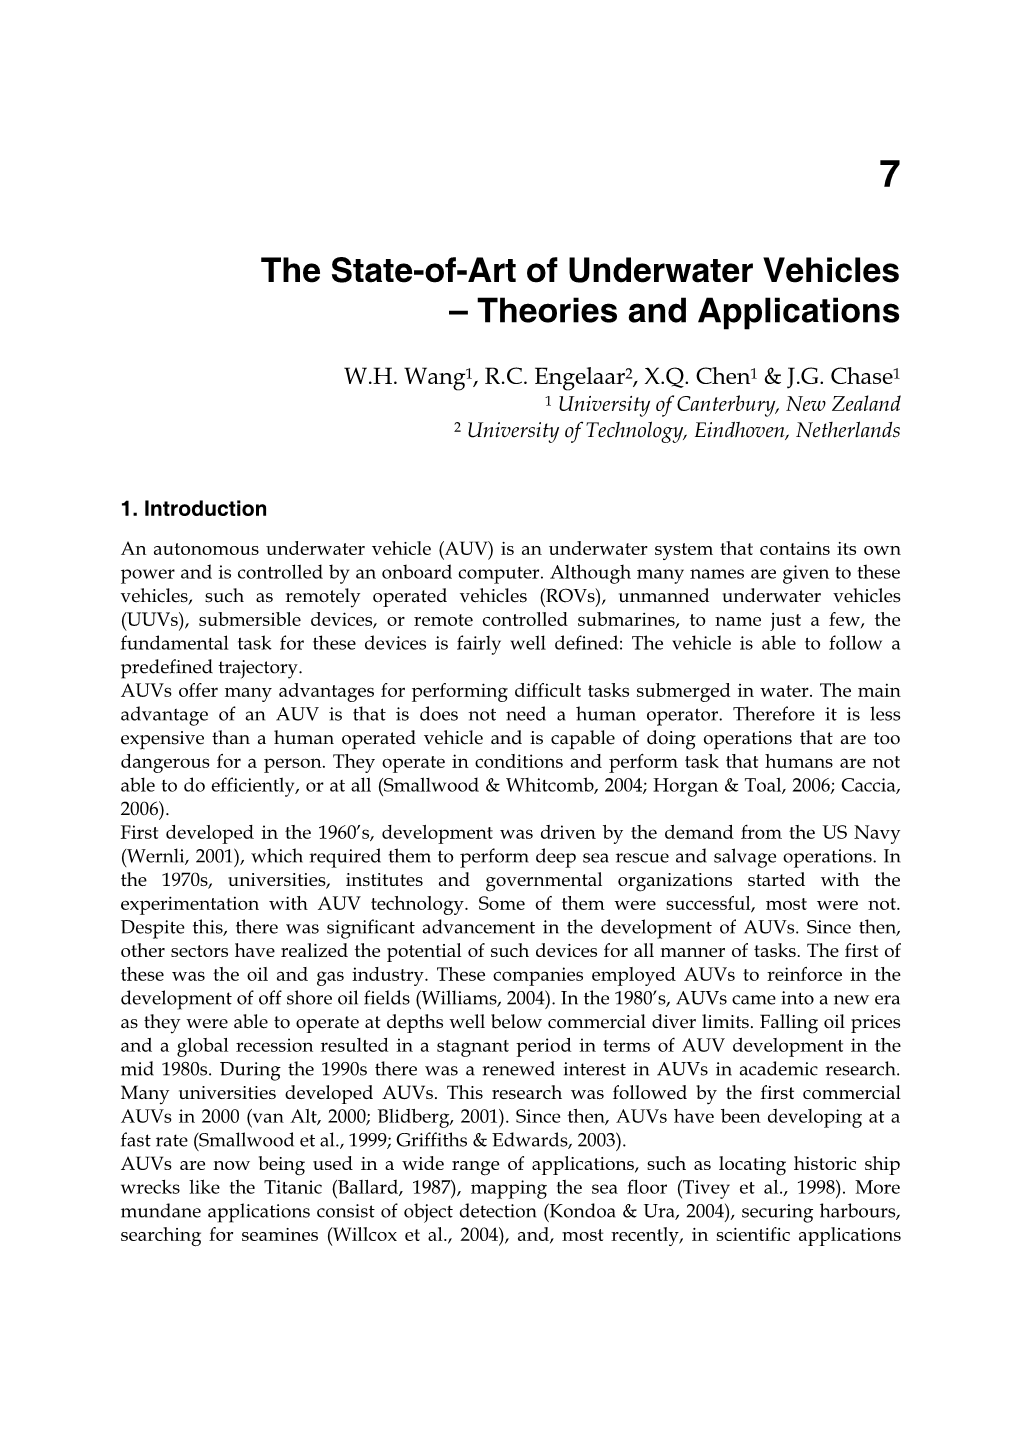 The State-Of-Art of Underwater Vehicles – Theories and Applications